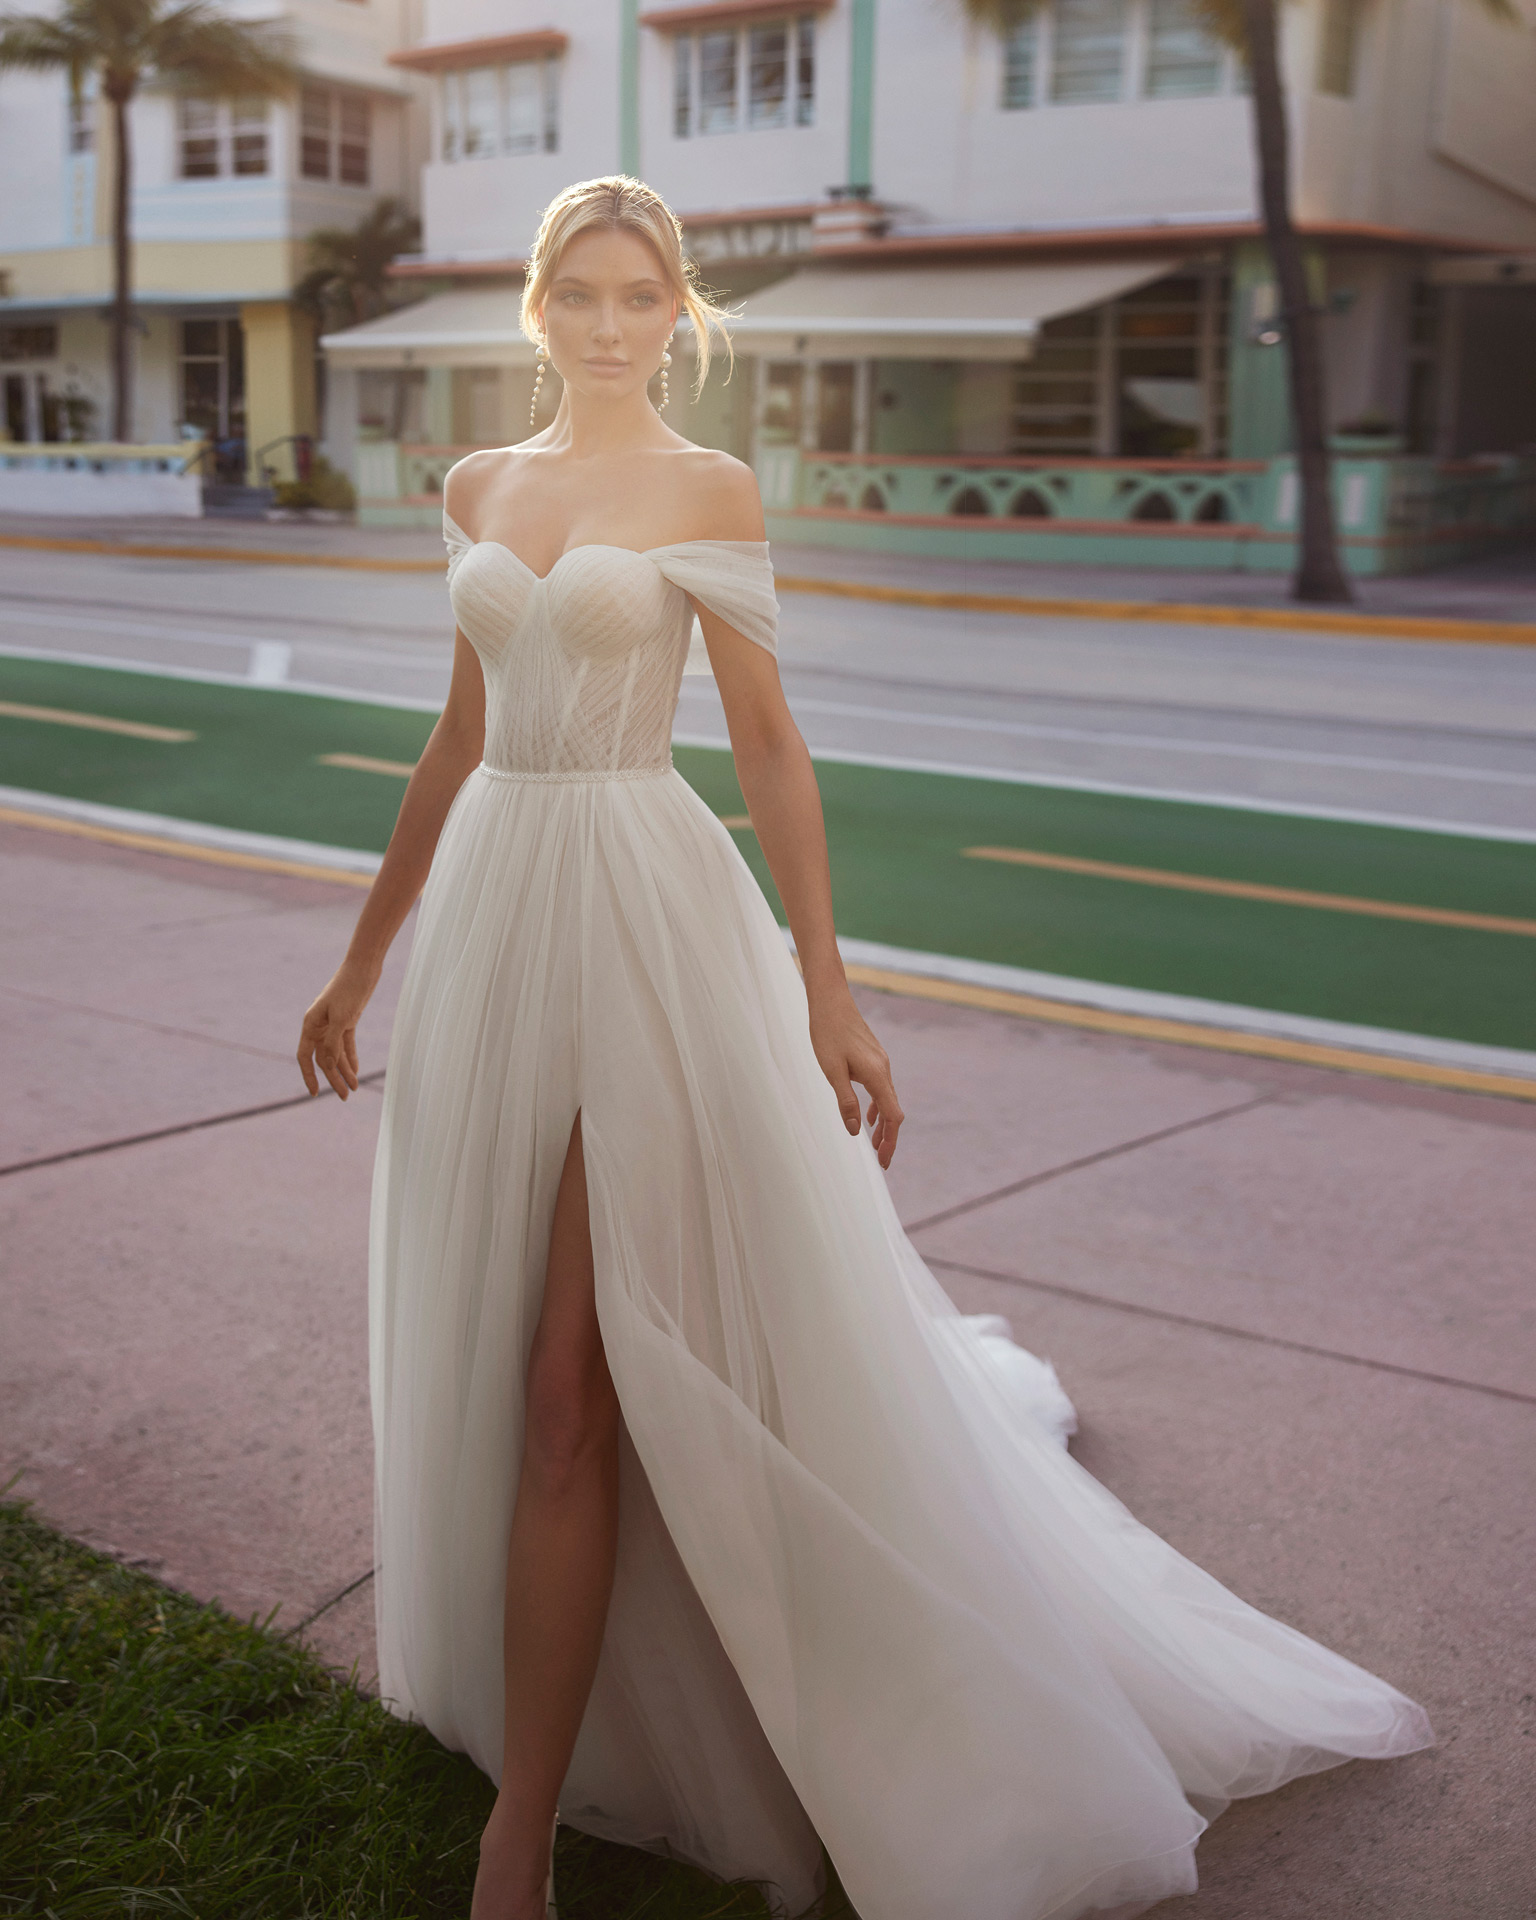 Romantic princess wedding dress, made in tulle. Featuring a sweetheart neckline, buttoned back, detachable sleeves and skirt with a front slit. Get this dreamy Luna Novias design. LUNA_NOVIAS.